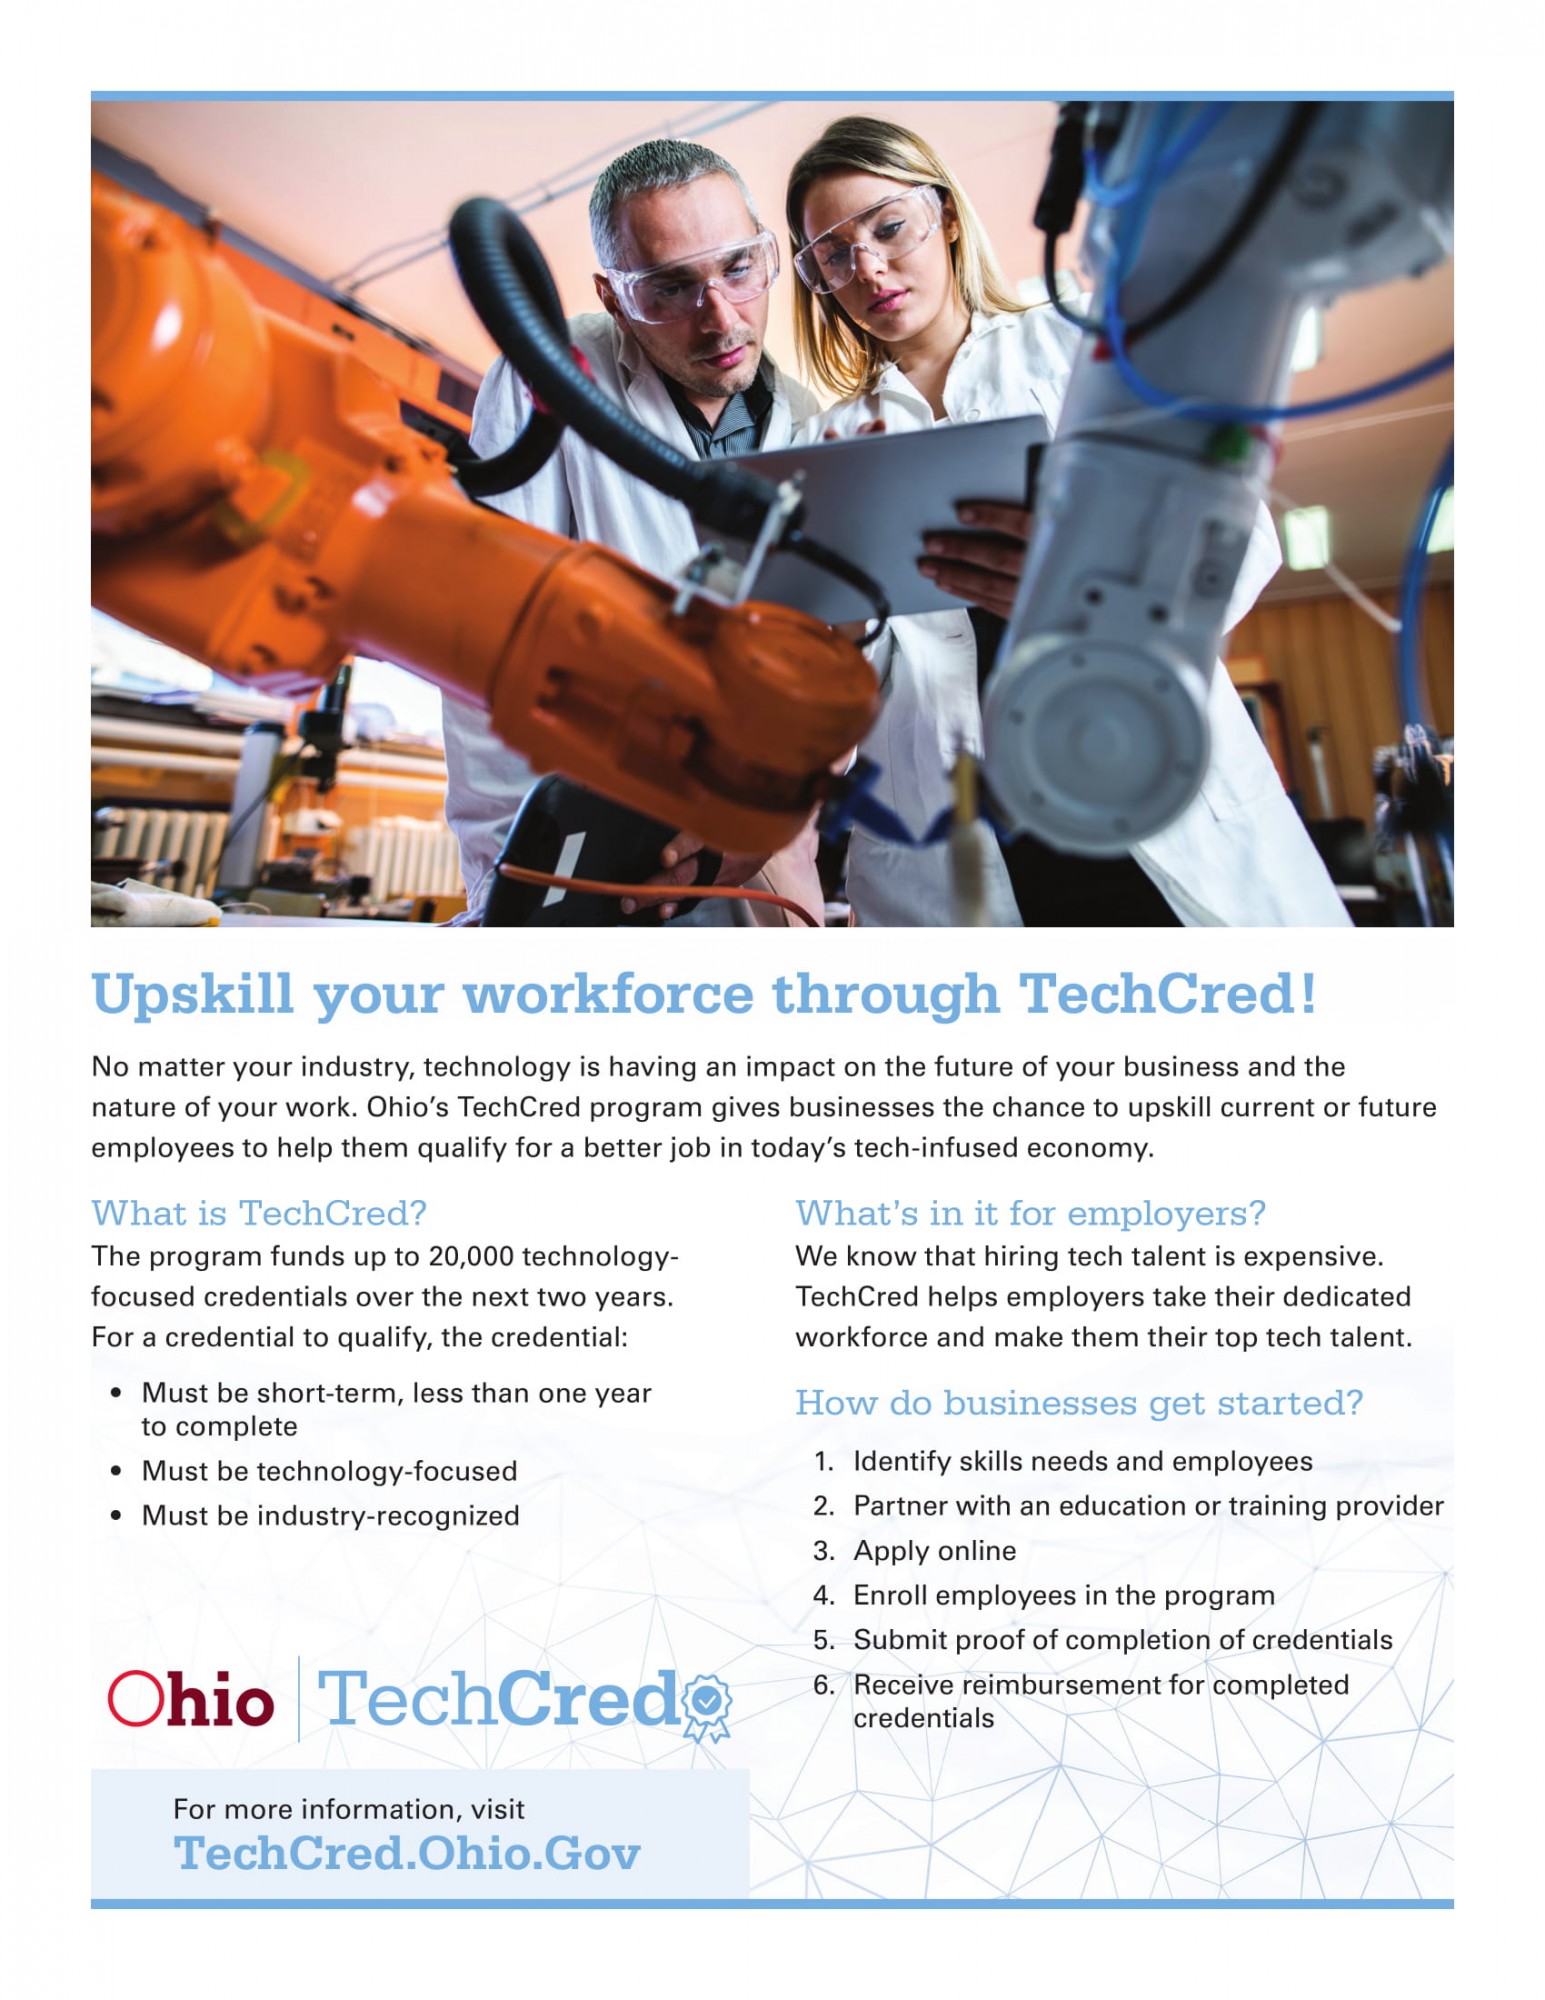 Support Ohio’s Technology Credential (TechCred) Program